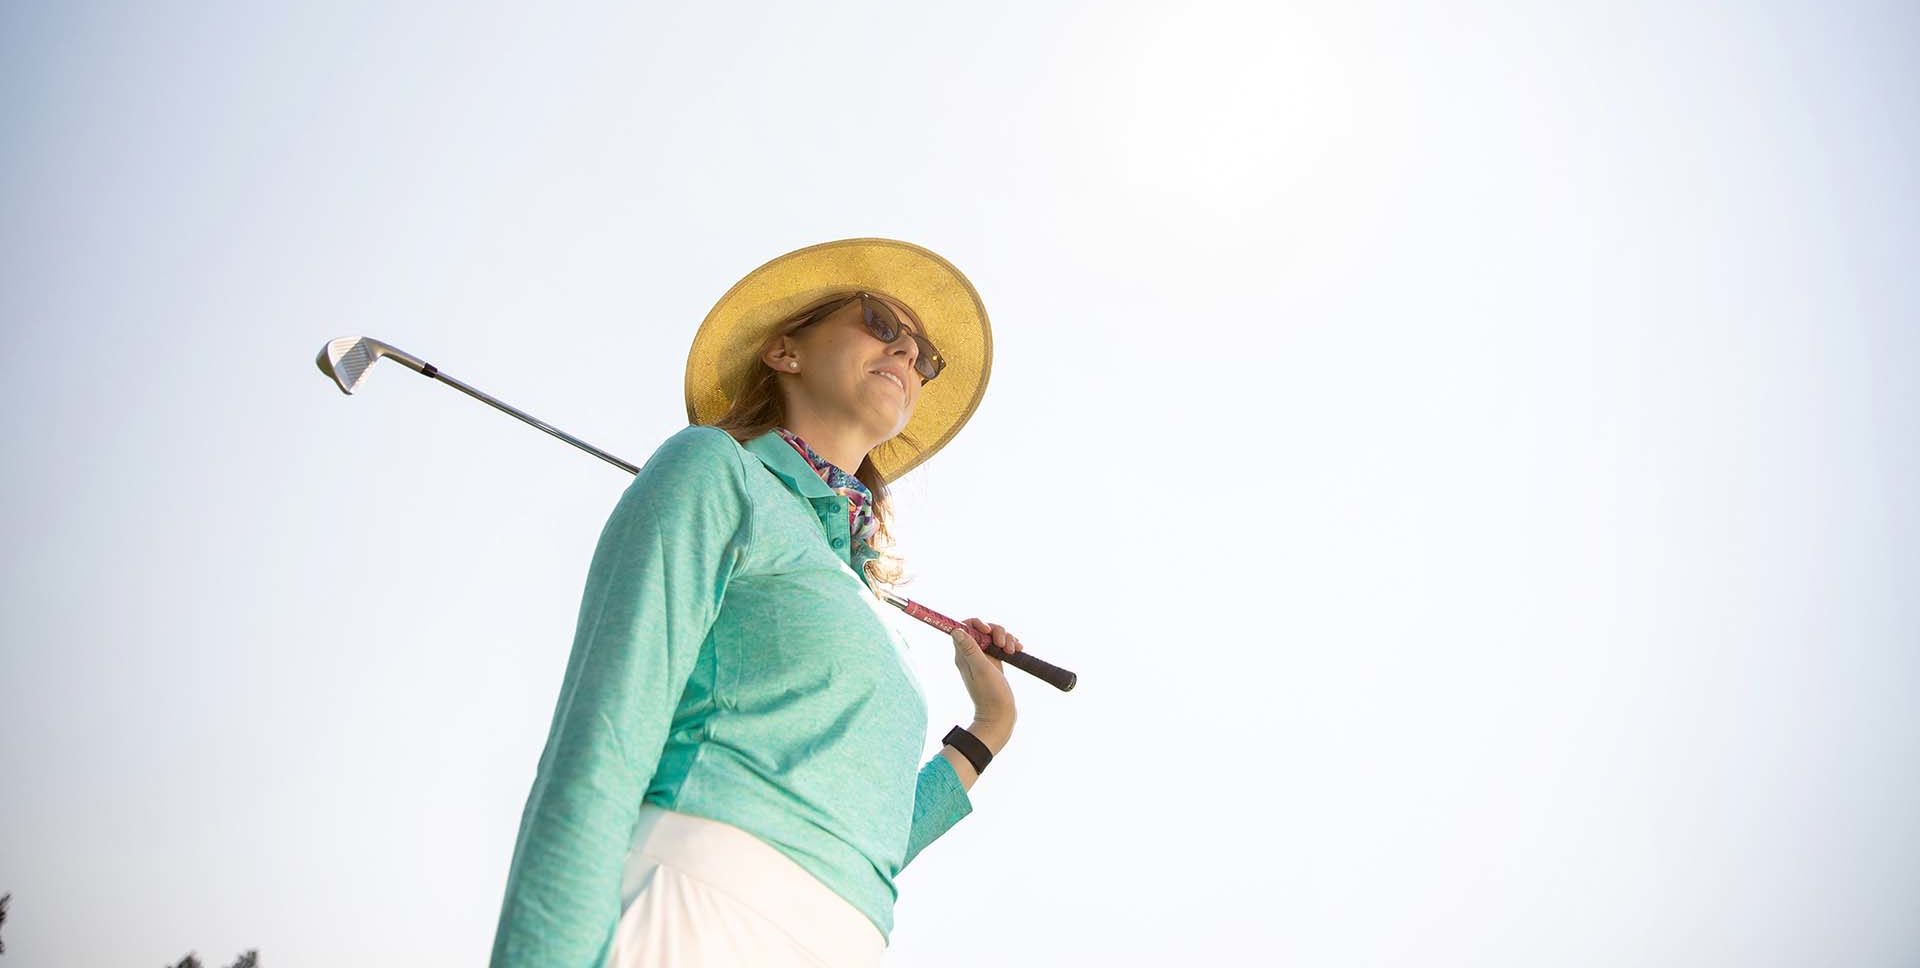 woman holding a golf club wearing an anti-aging sun hat and sun protective clothing